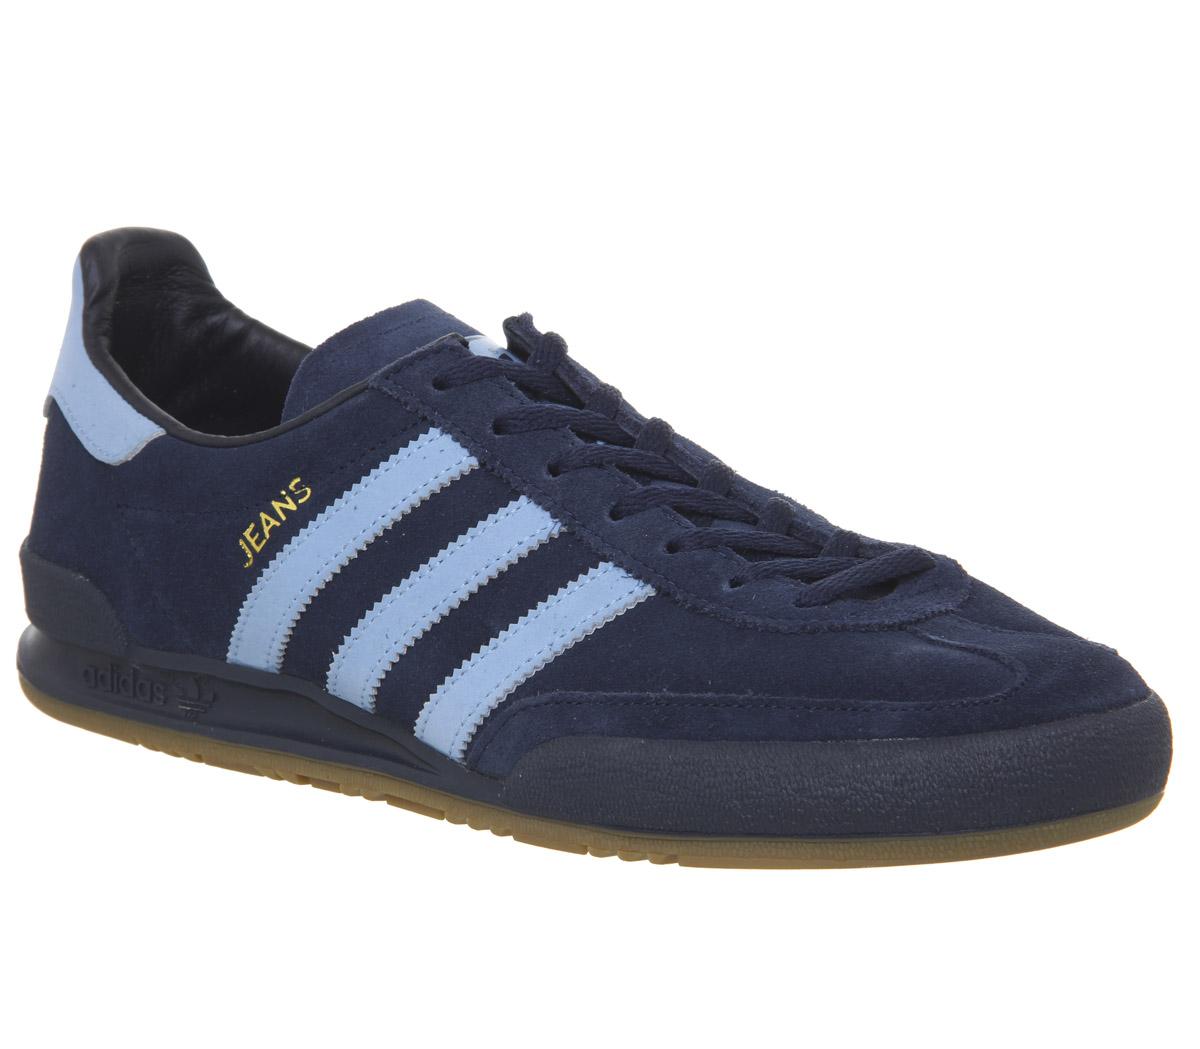 adidas jean trainers blue